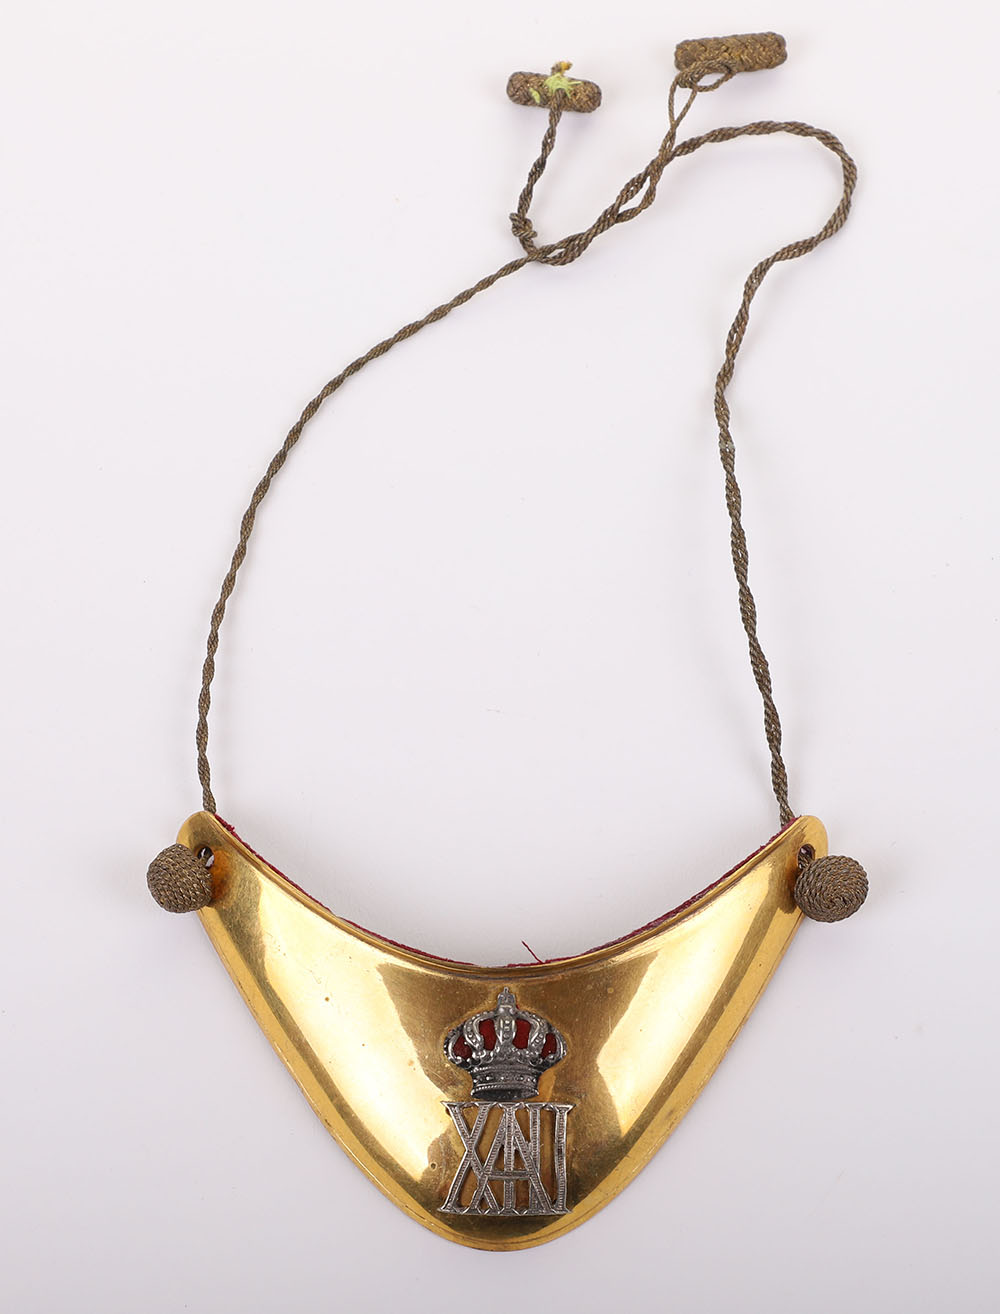 EUROPEAN OFFICERS GORGET - Image 2 of 7